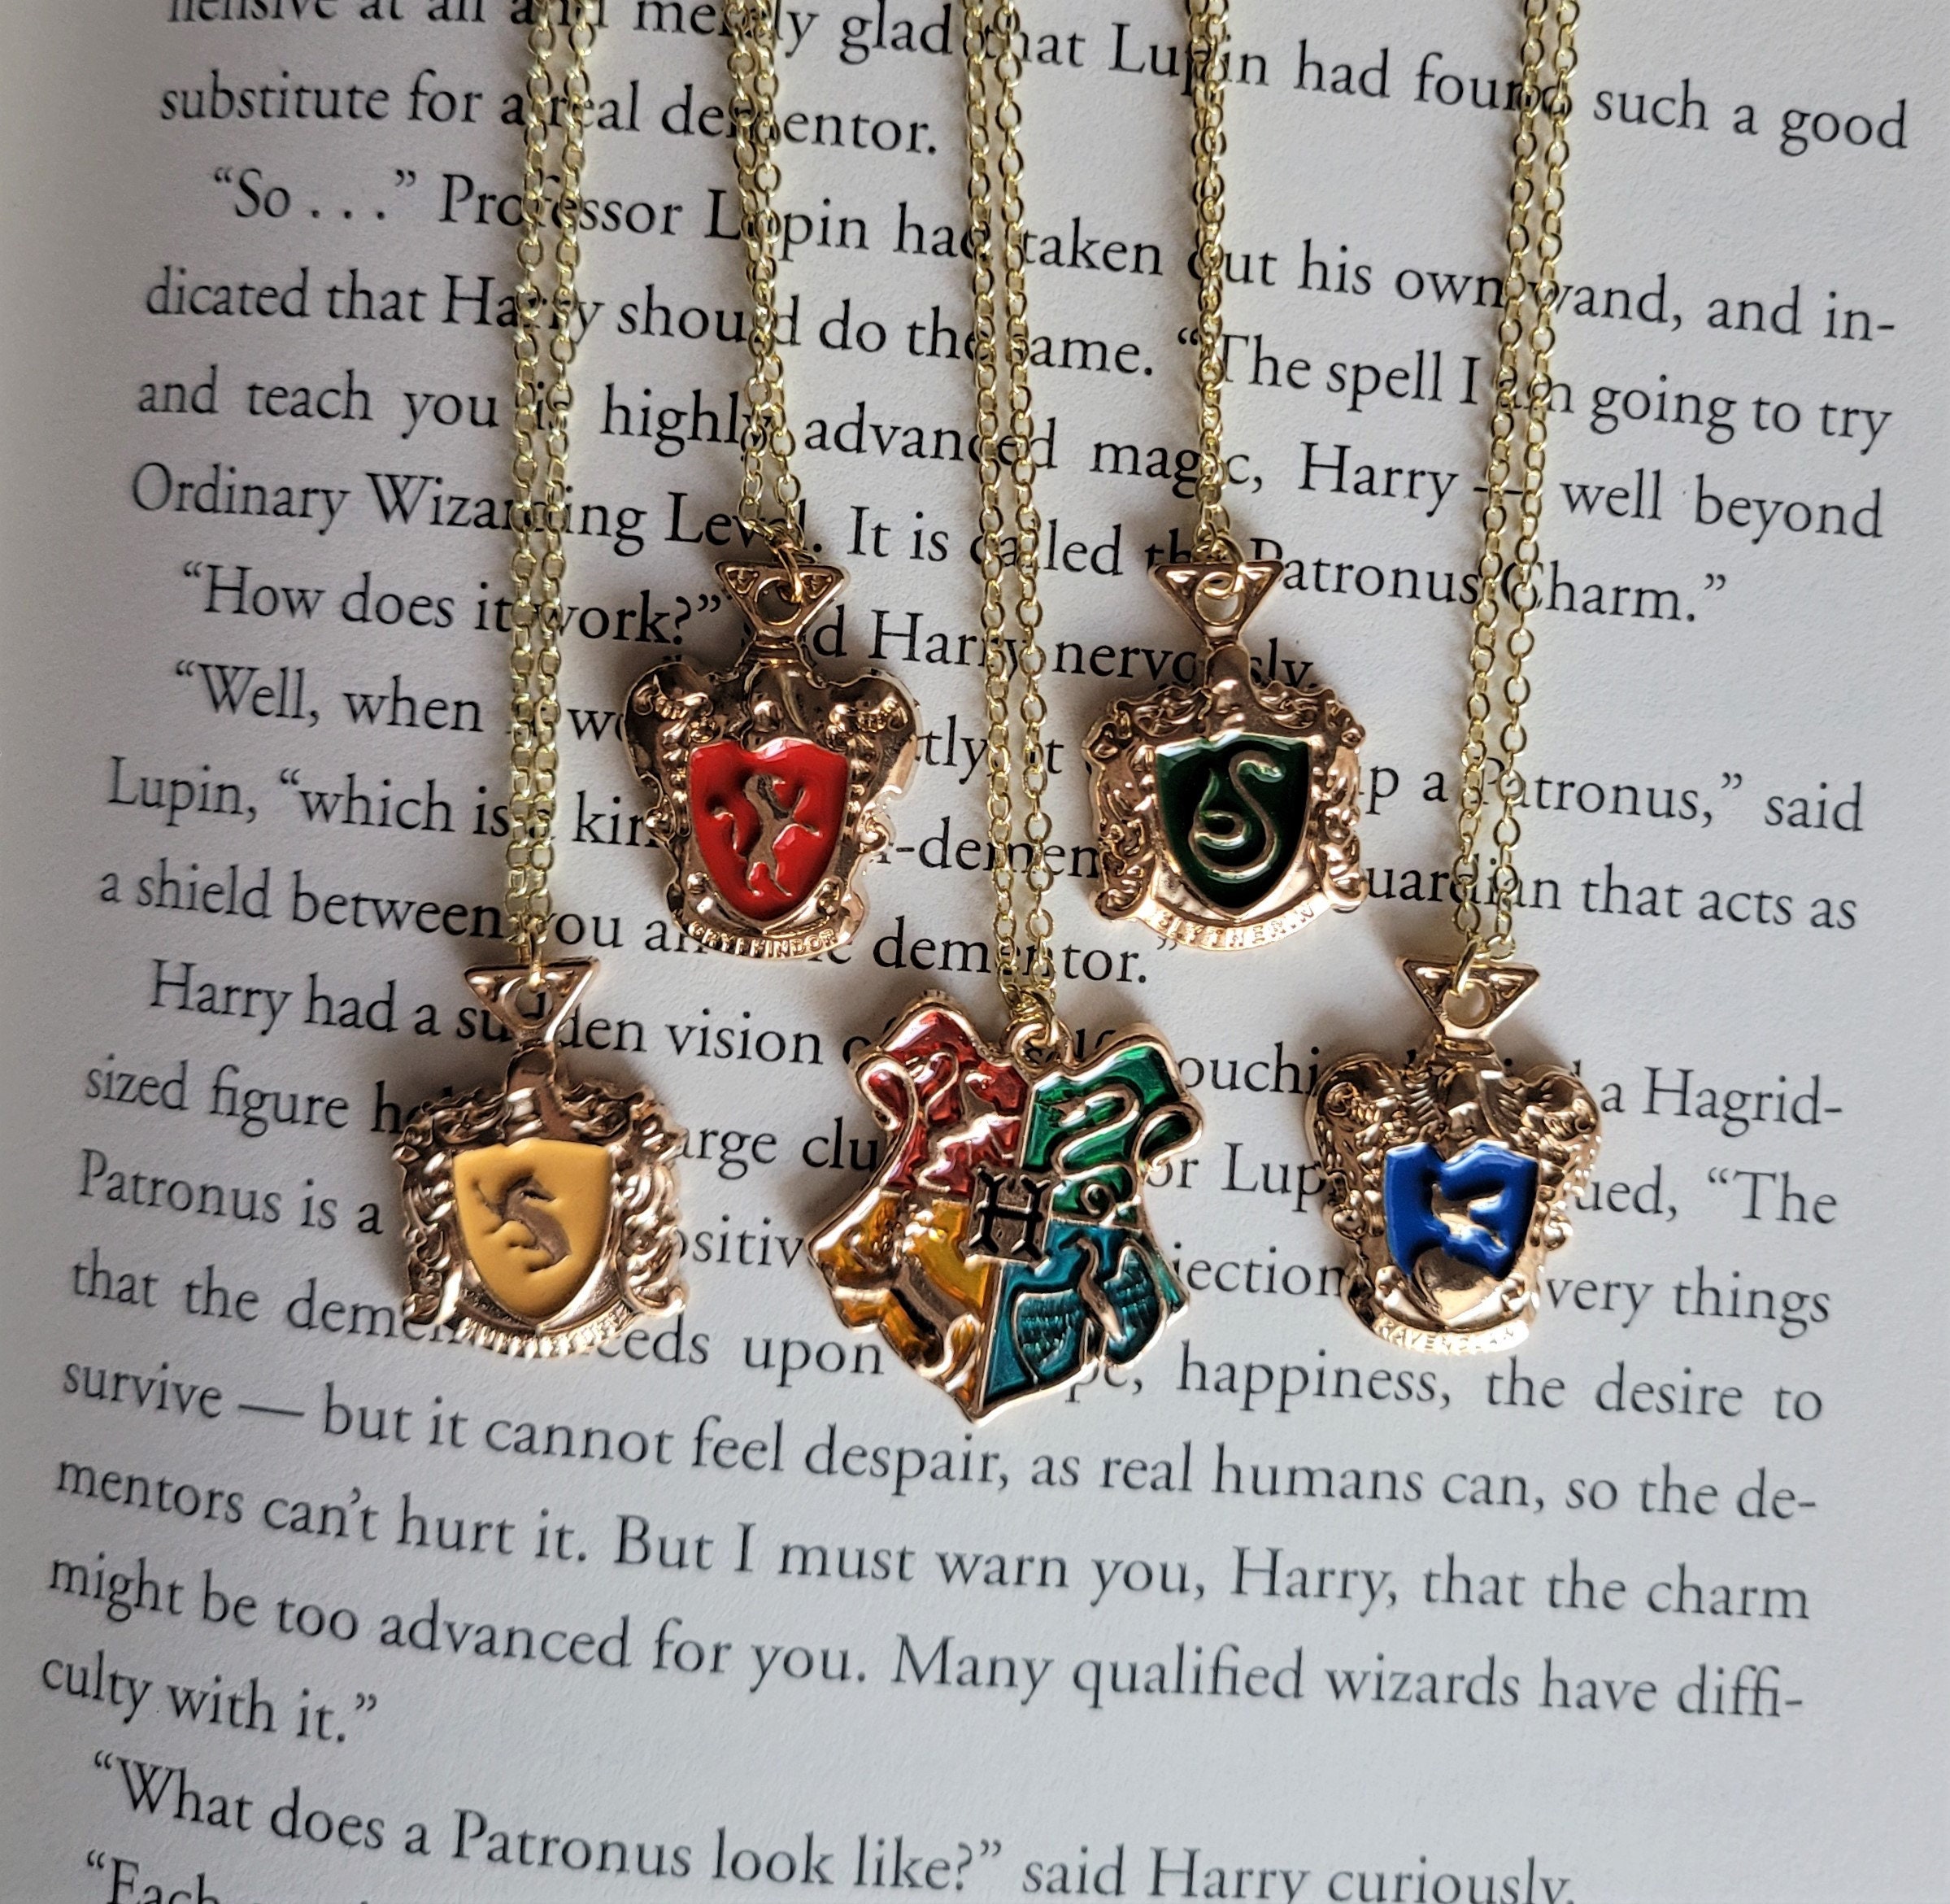 Harry Potter Hogwarts Antiqued Silver Charms 10PC Mix Jewelry Making Supply  Pendant Bracelet DIY Crafting (50)